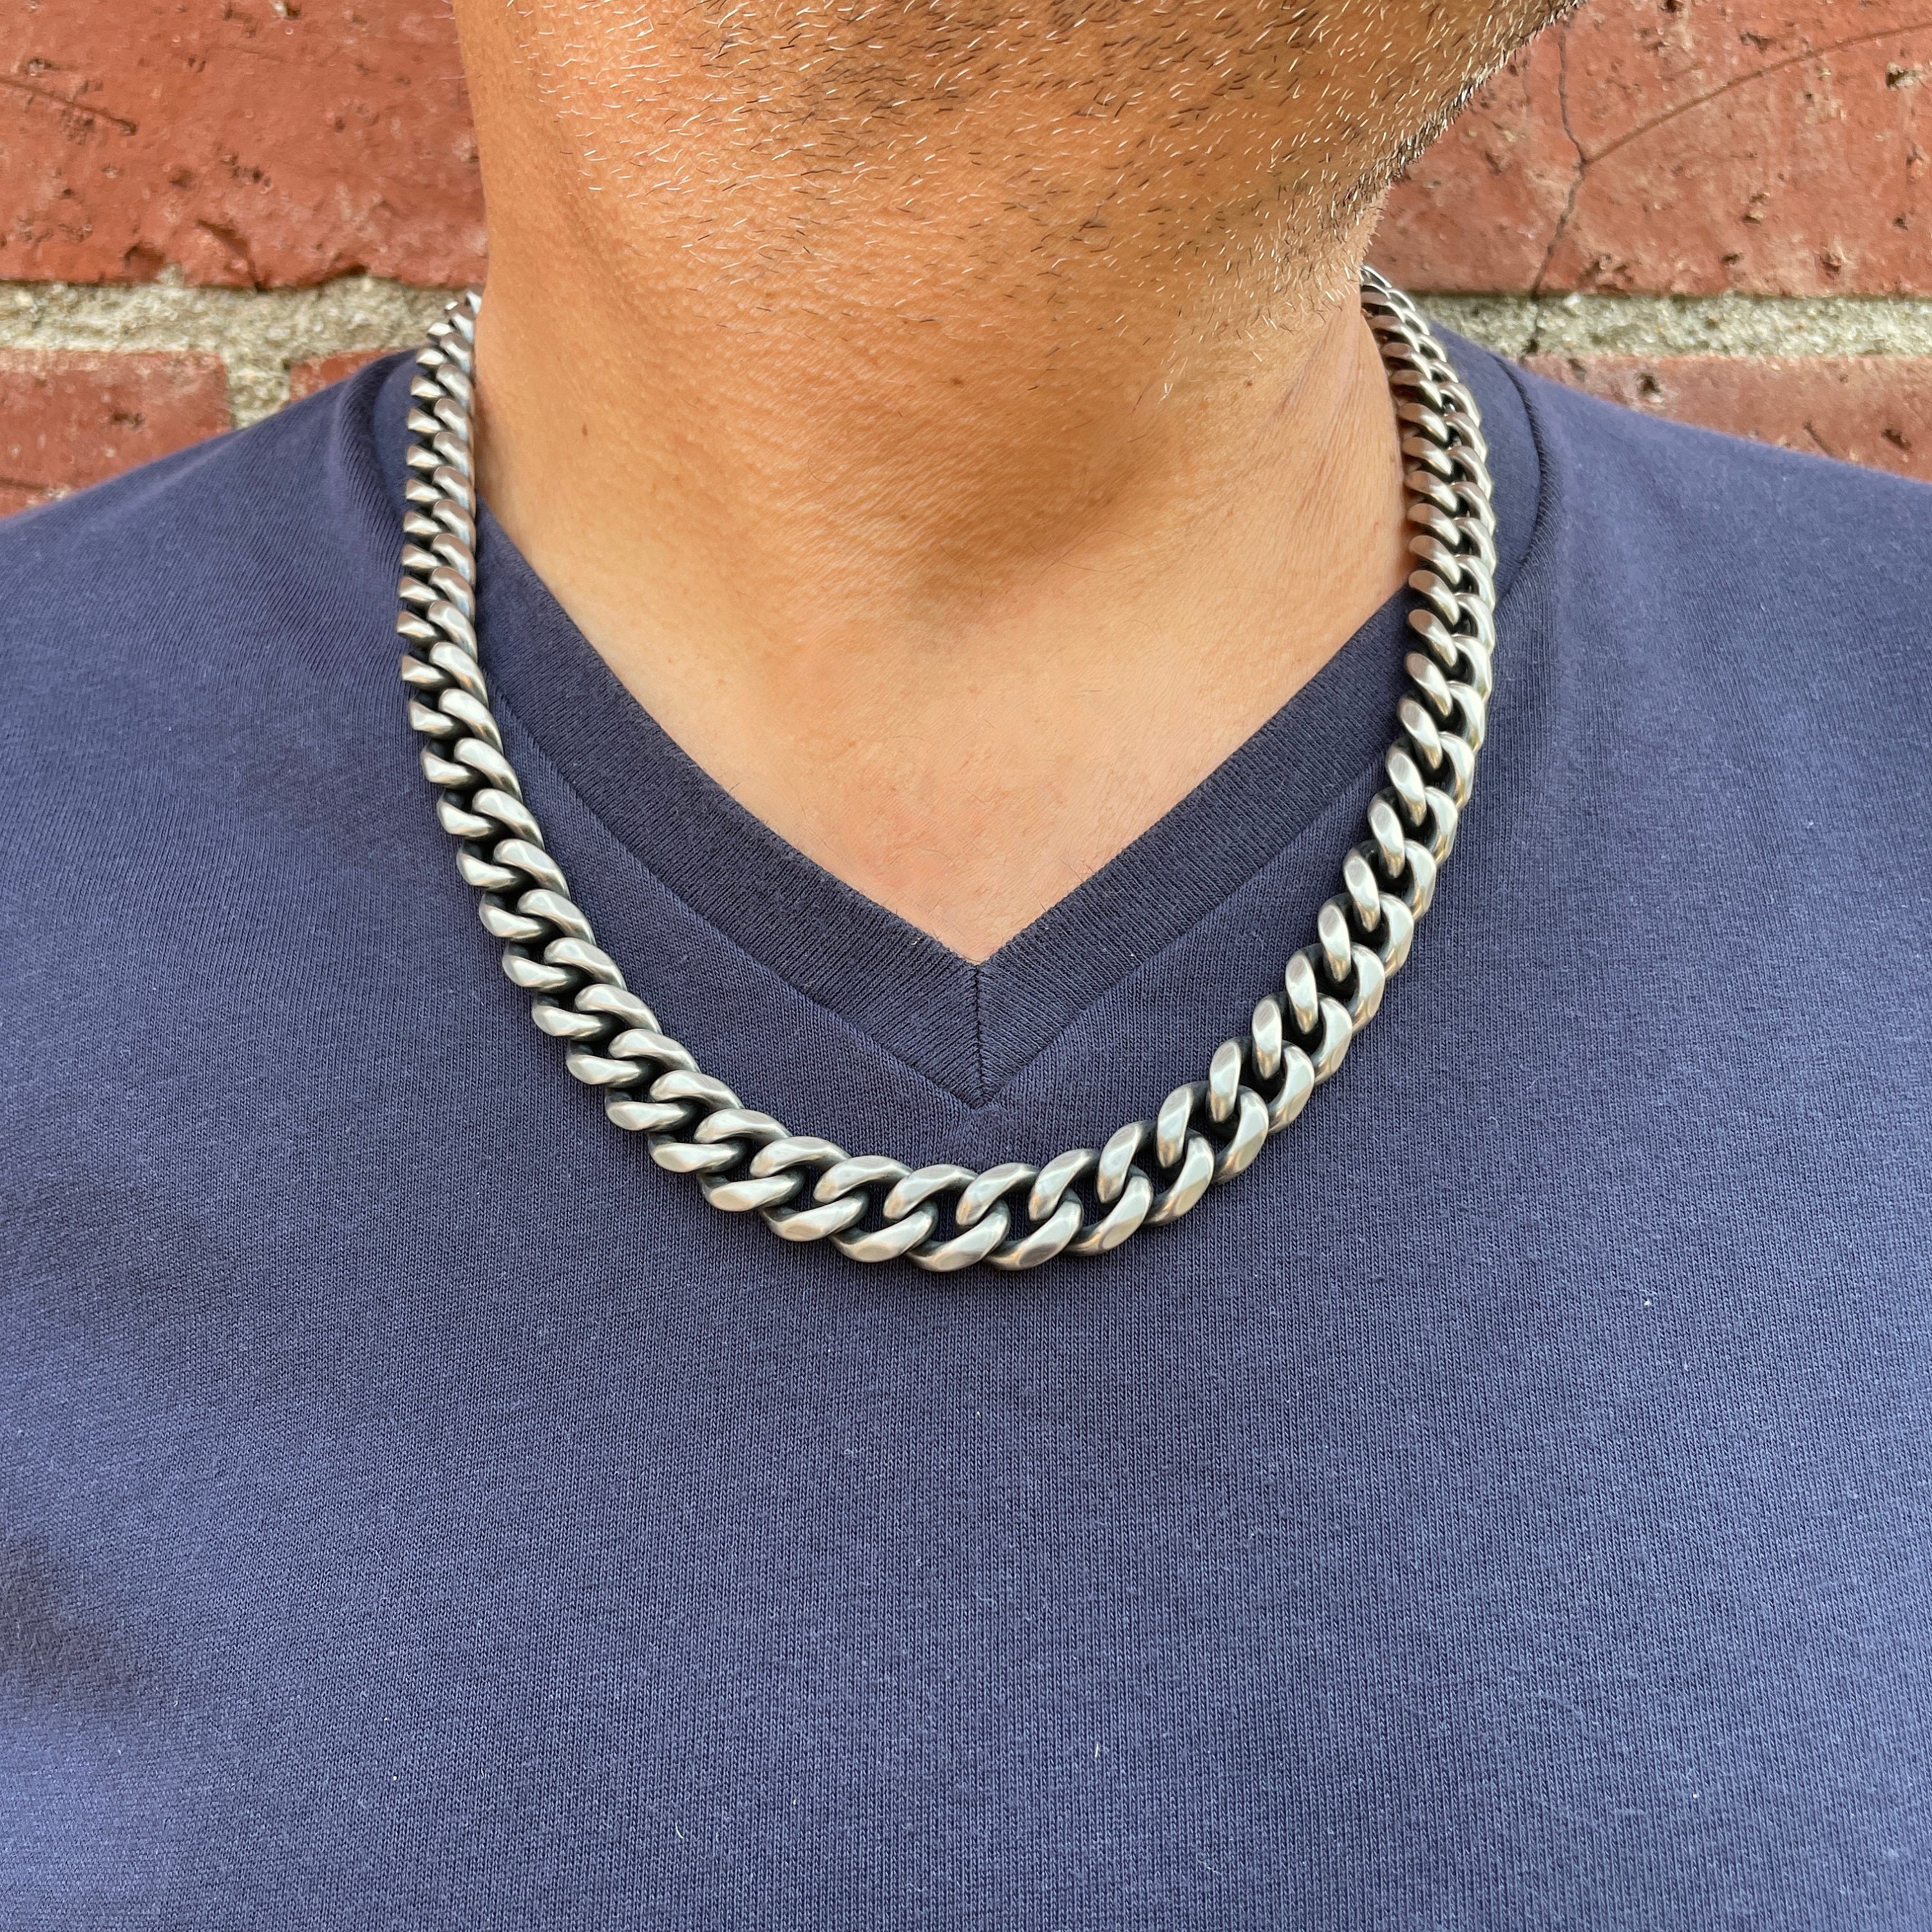 Sterling Silver Cuban Curb Chain Necklace 13.5mm (Gauge 350). Available in 4 Lengths.